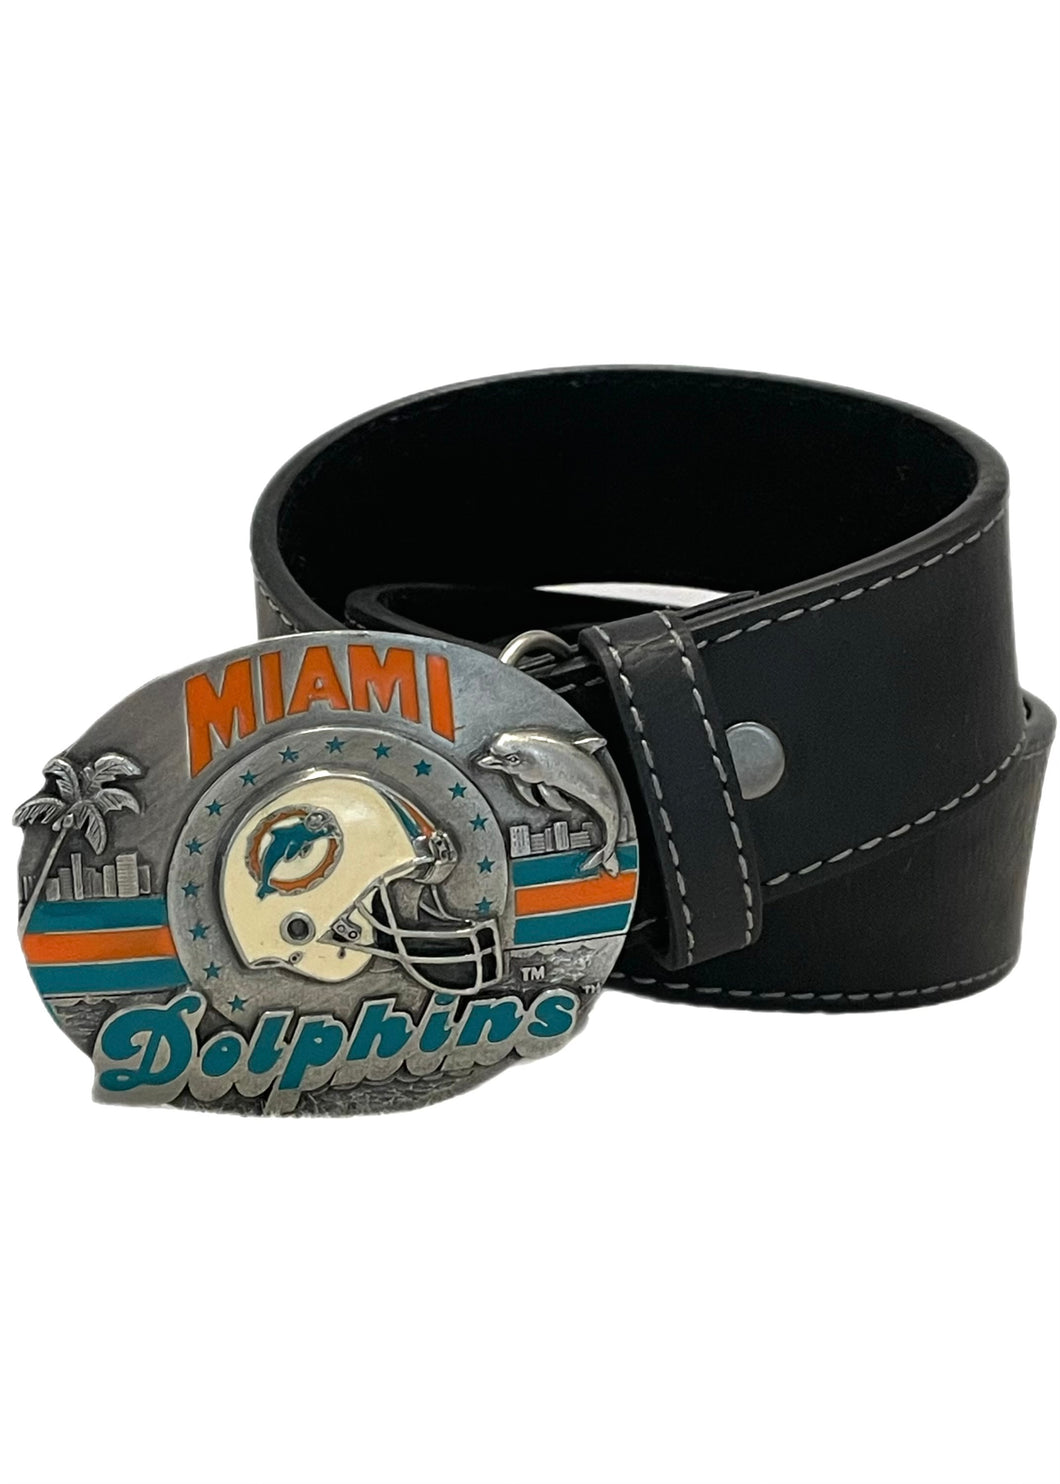 Miami Dolphins, Football Vintage 1993 Belt Buckle with New Soft Leather Strap